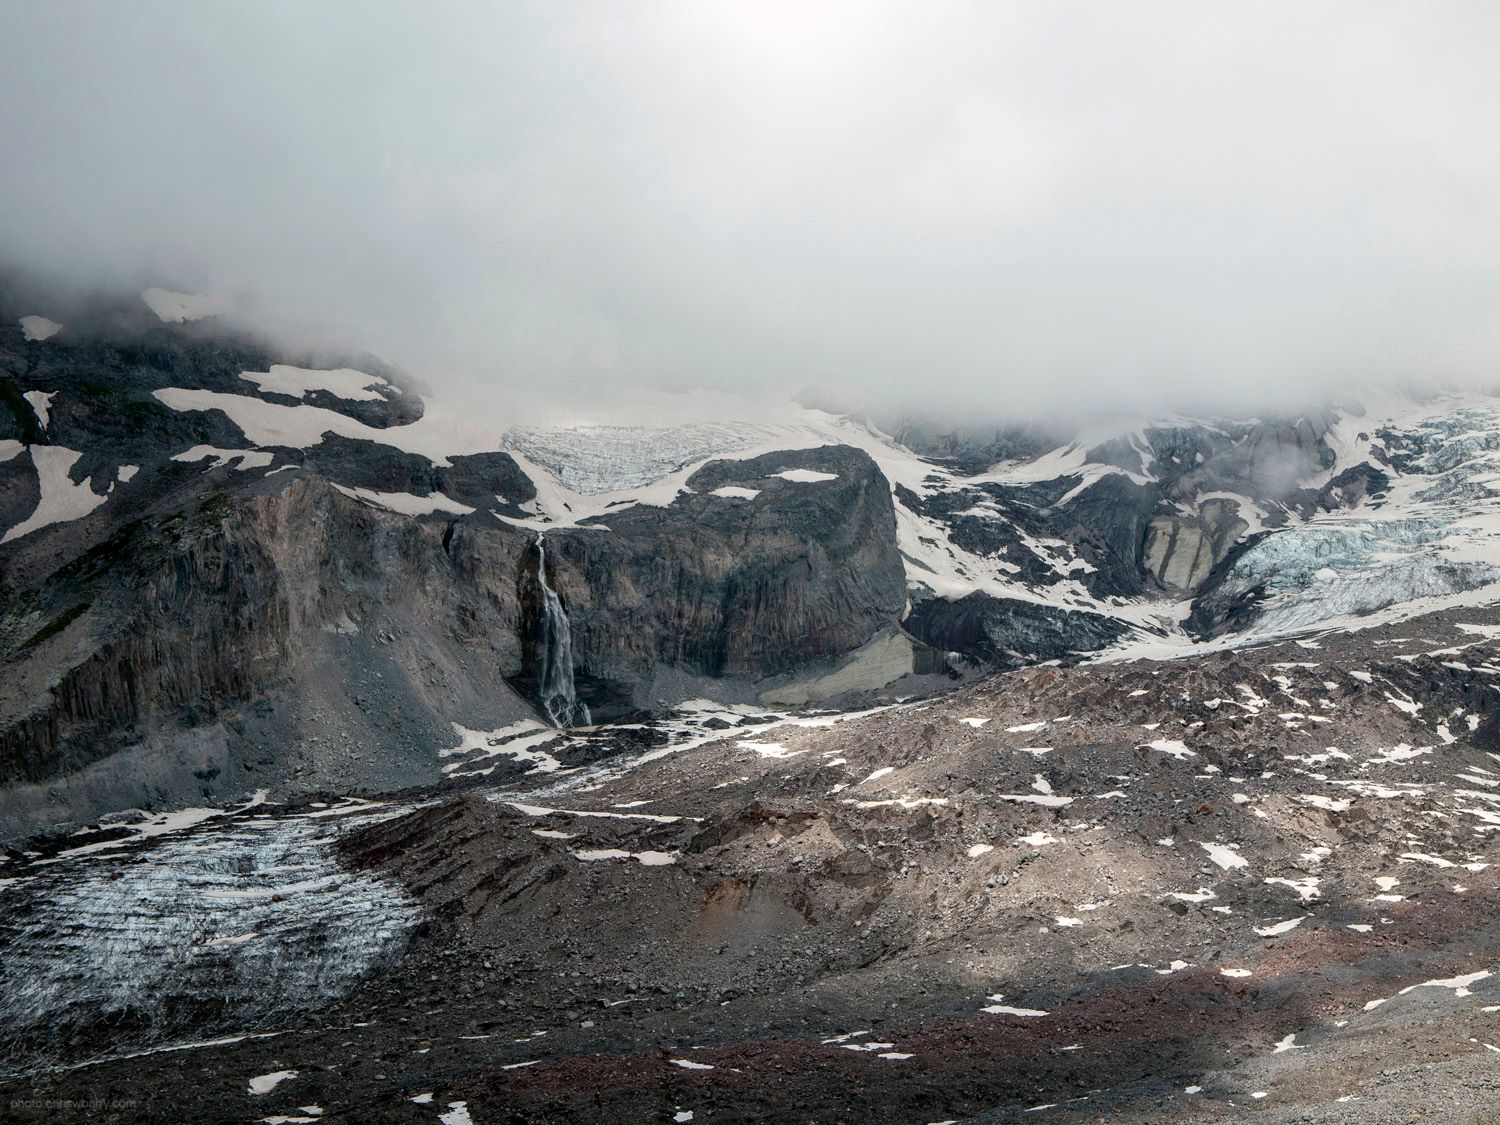 Landscape of a glacier. The top 1/3rd of the photo is clouds, and the rest is barren rocks and cliffs, spotted with snow